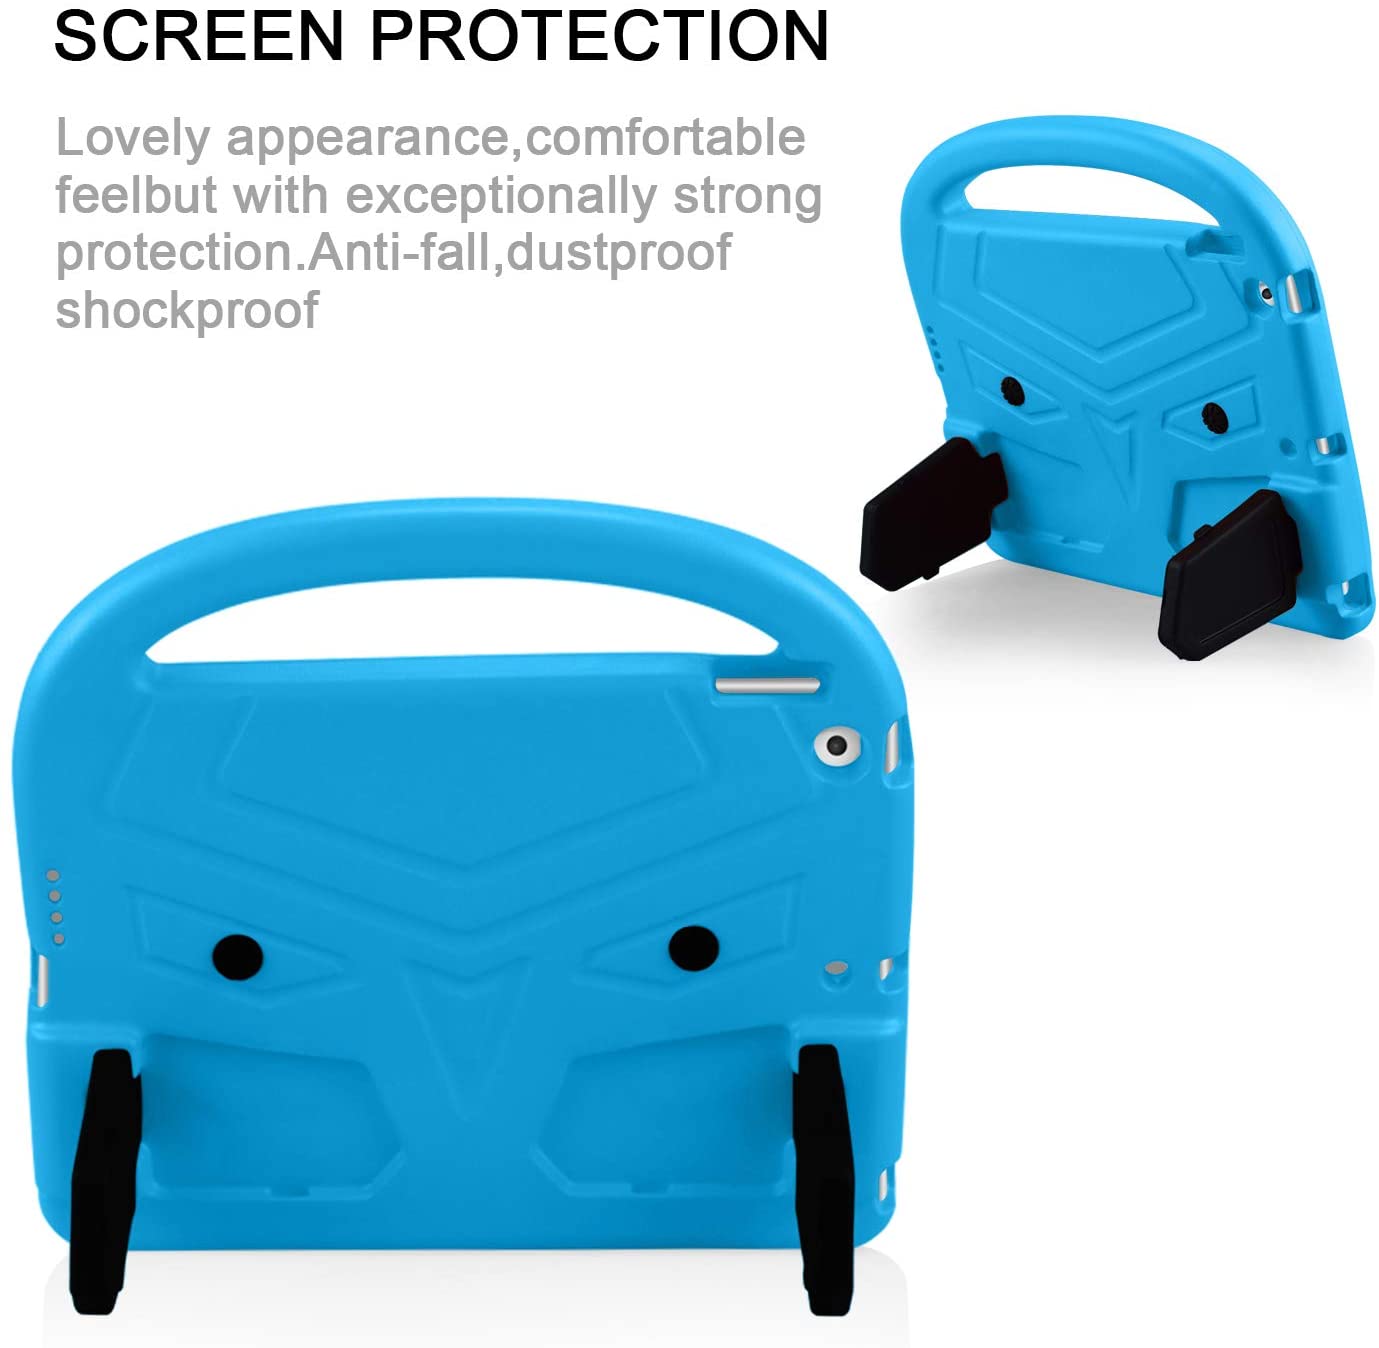 Built-in Stand Full-Body Protective Cover for Apple iPad 10.2/10.5-inch